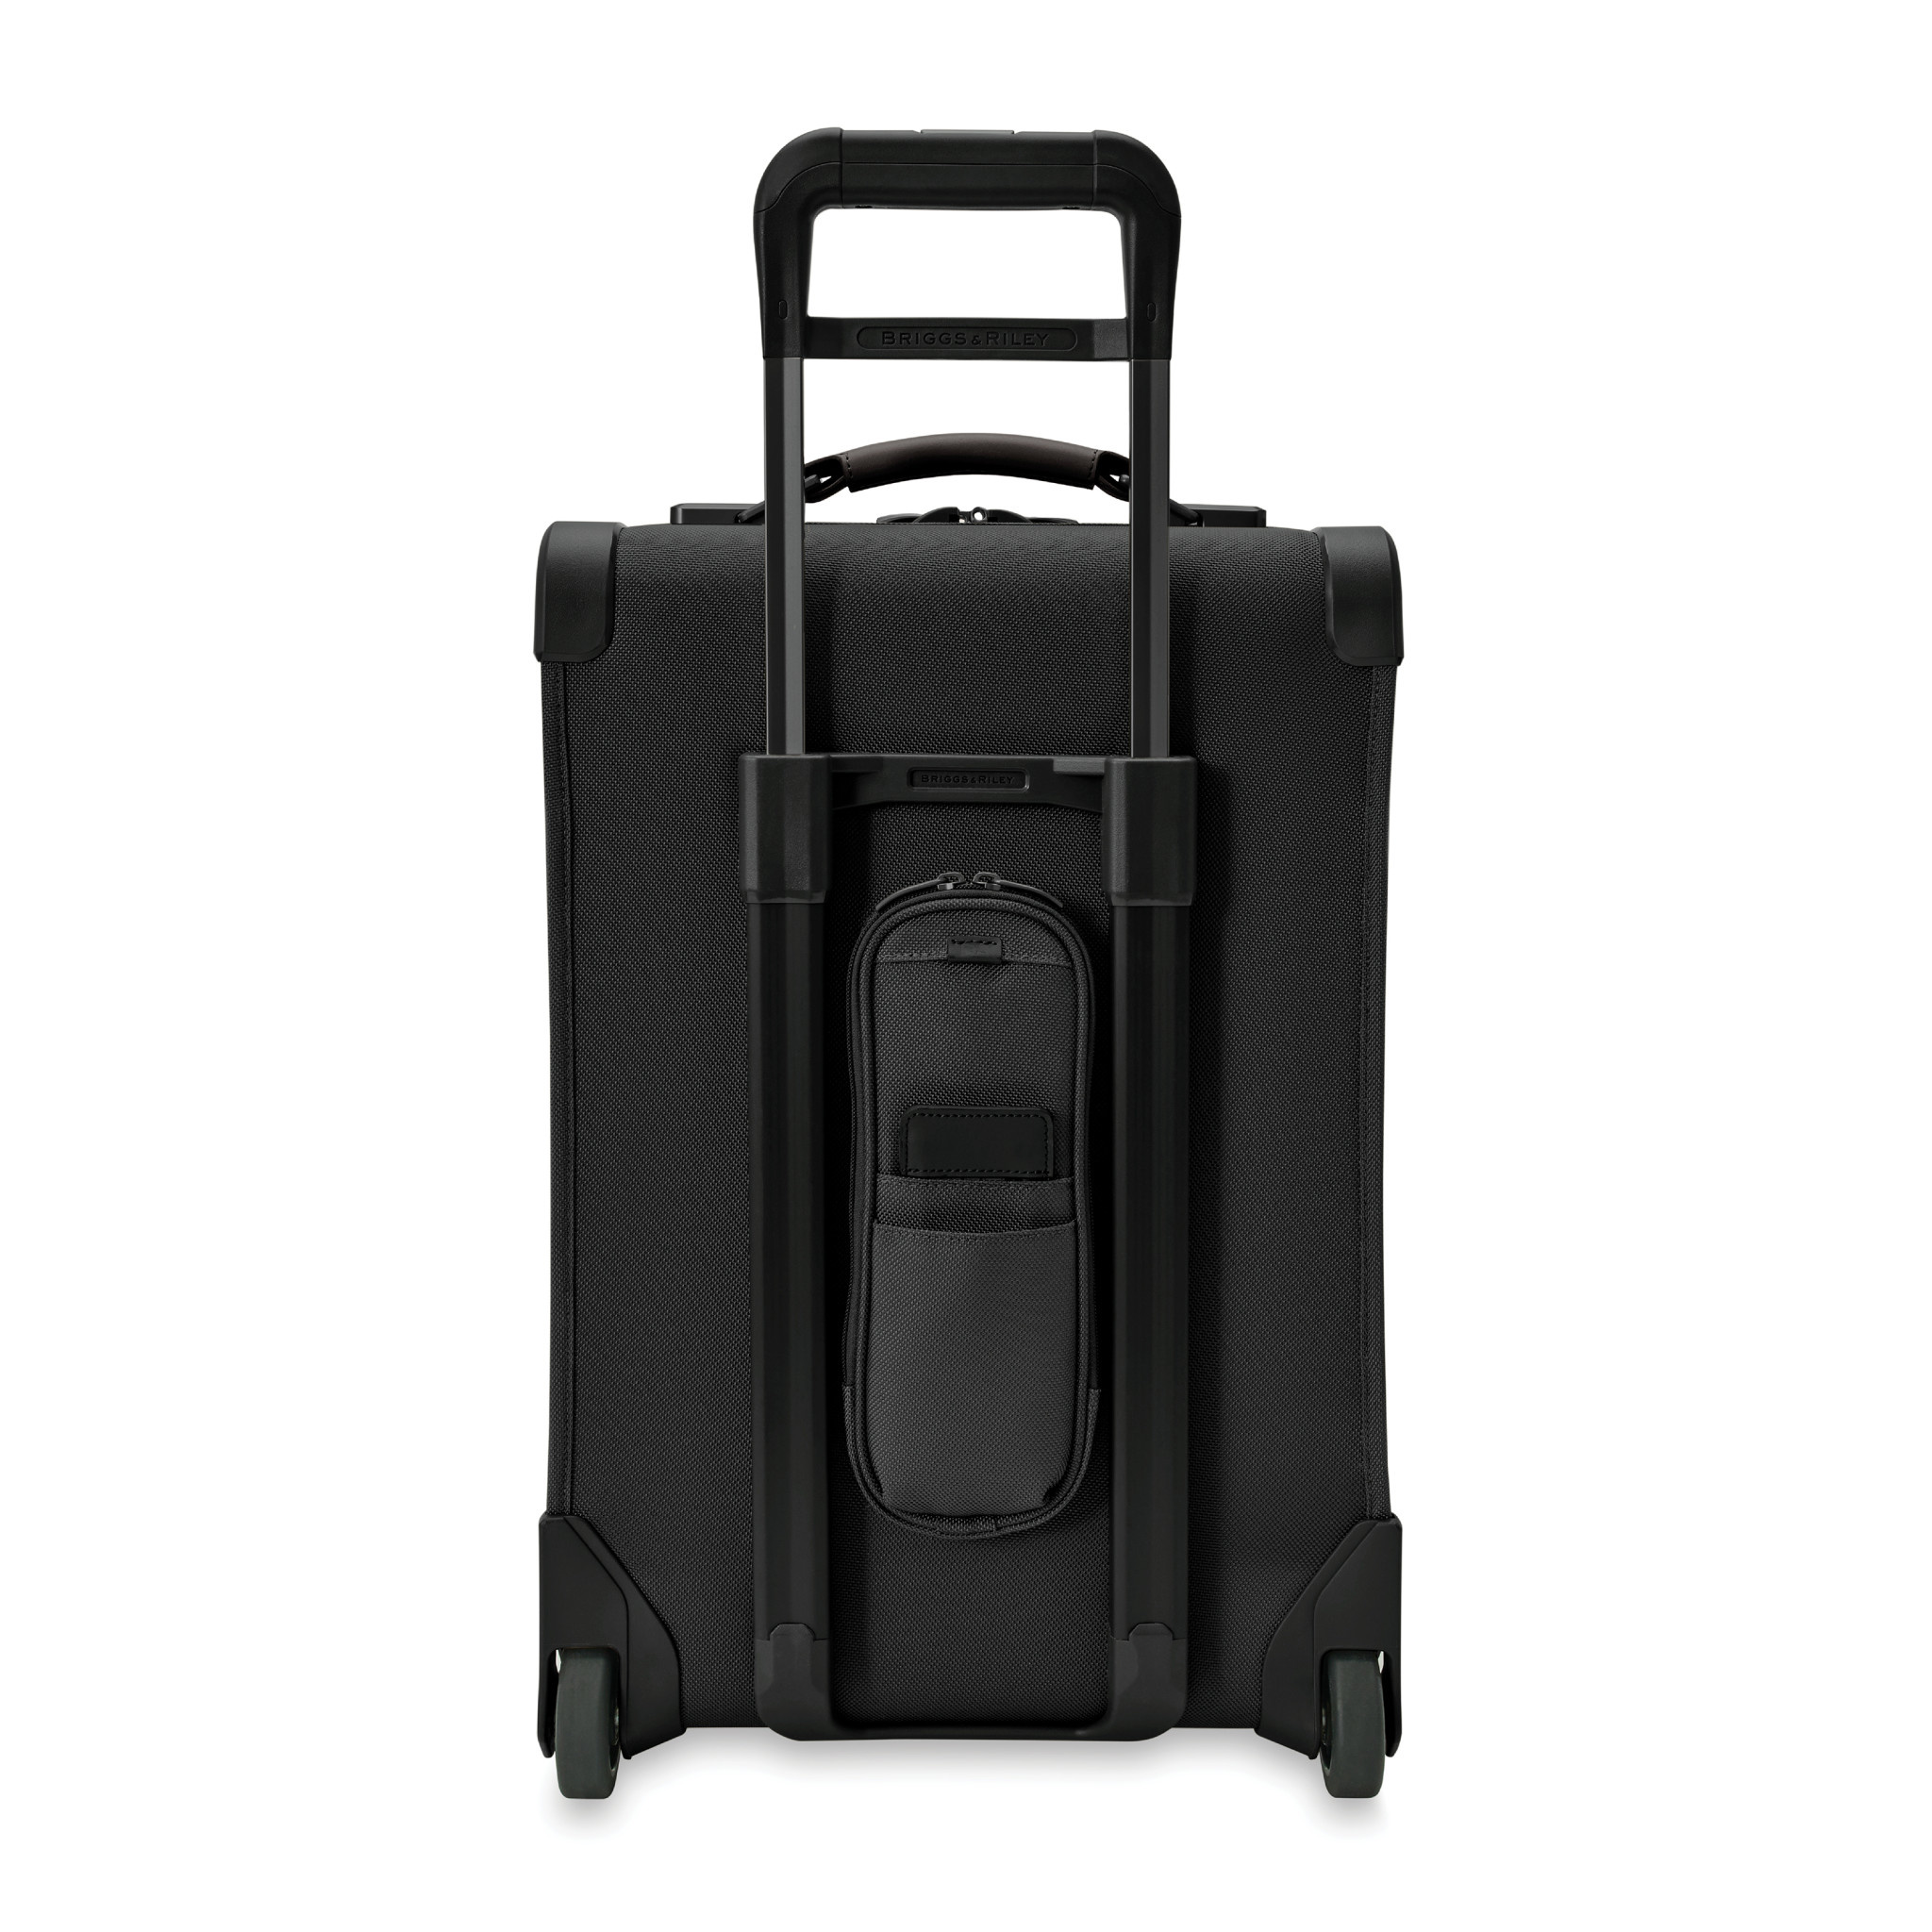 Carry-On Luggage  Shop Carry-On Luggage with Wheels - Briggs & Riley